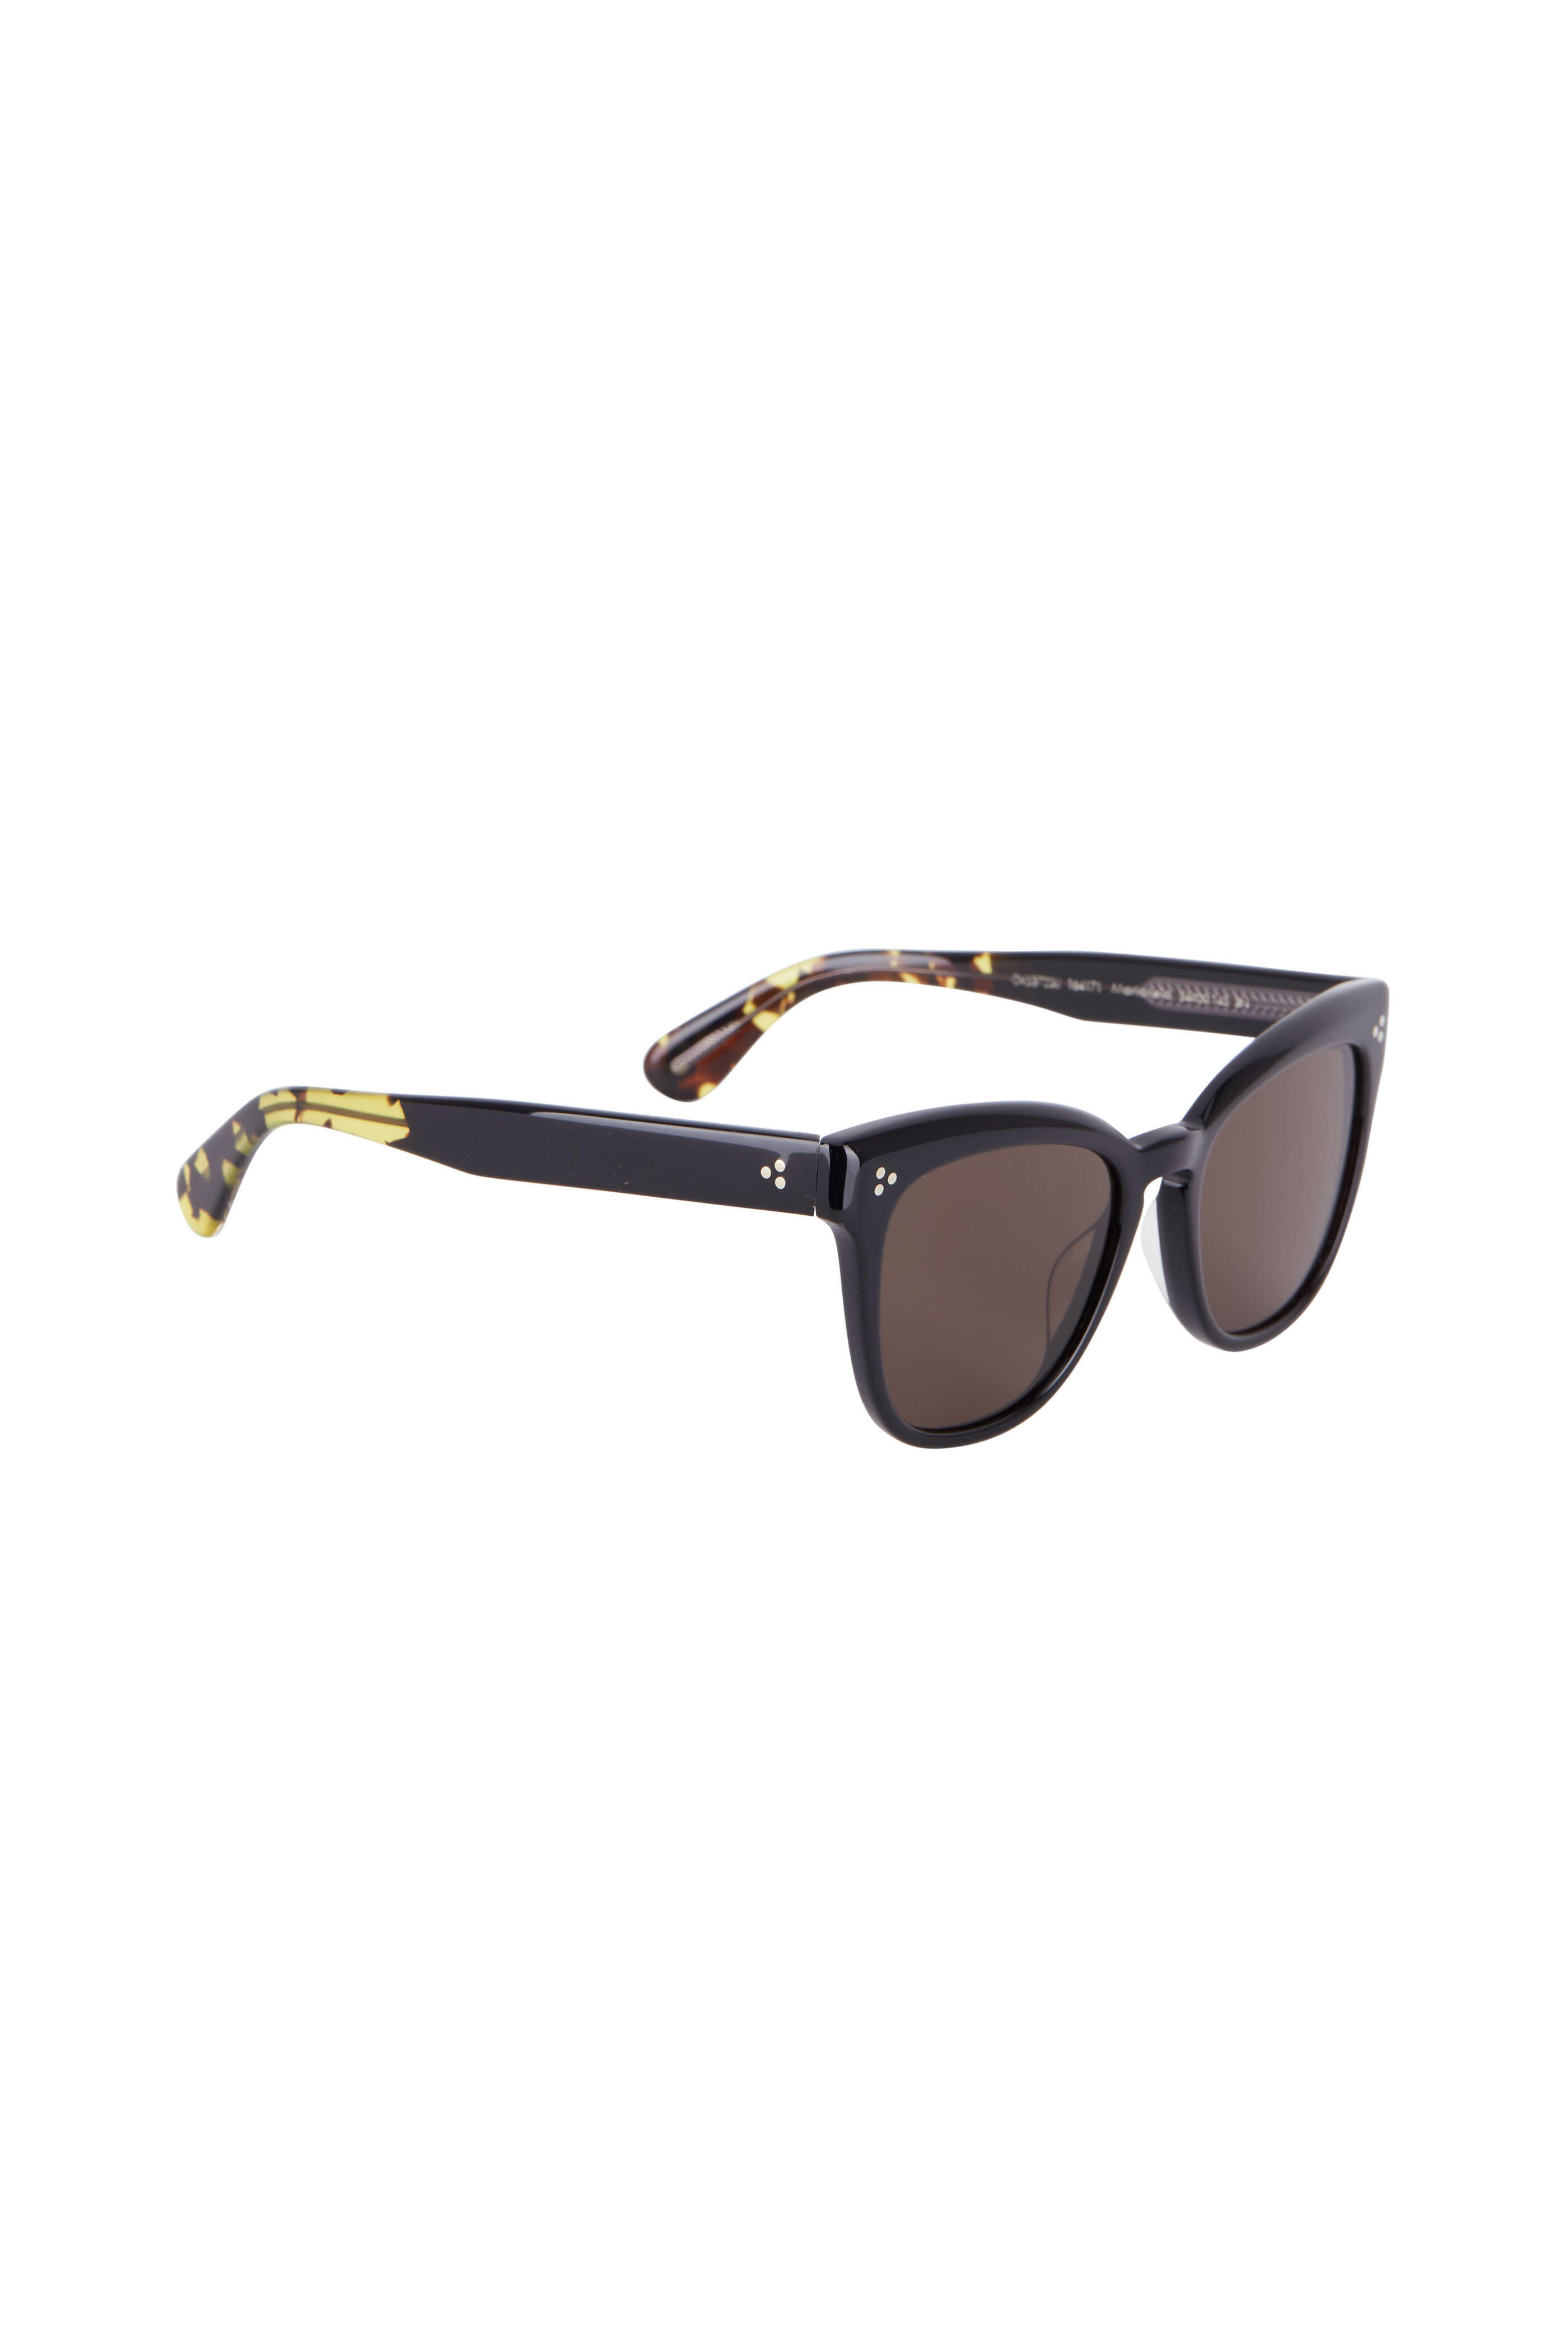 Oliver Peoples - Marianela Black Sunglasses | Mitchell Stores